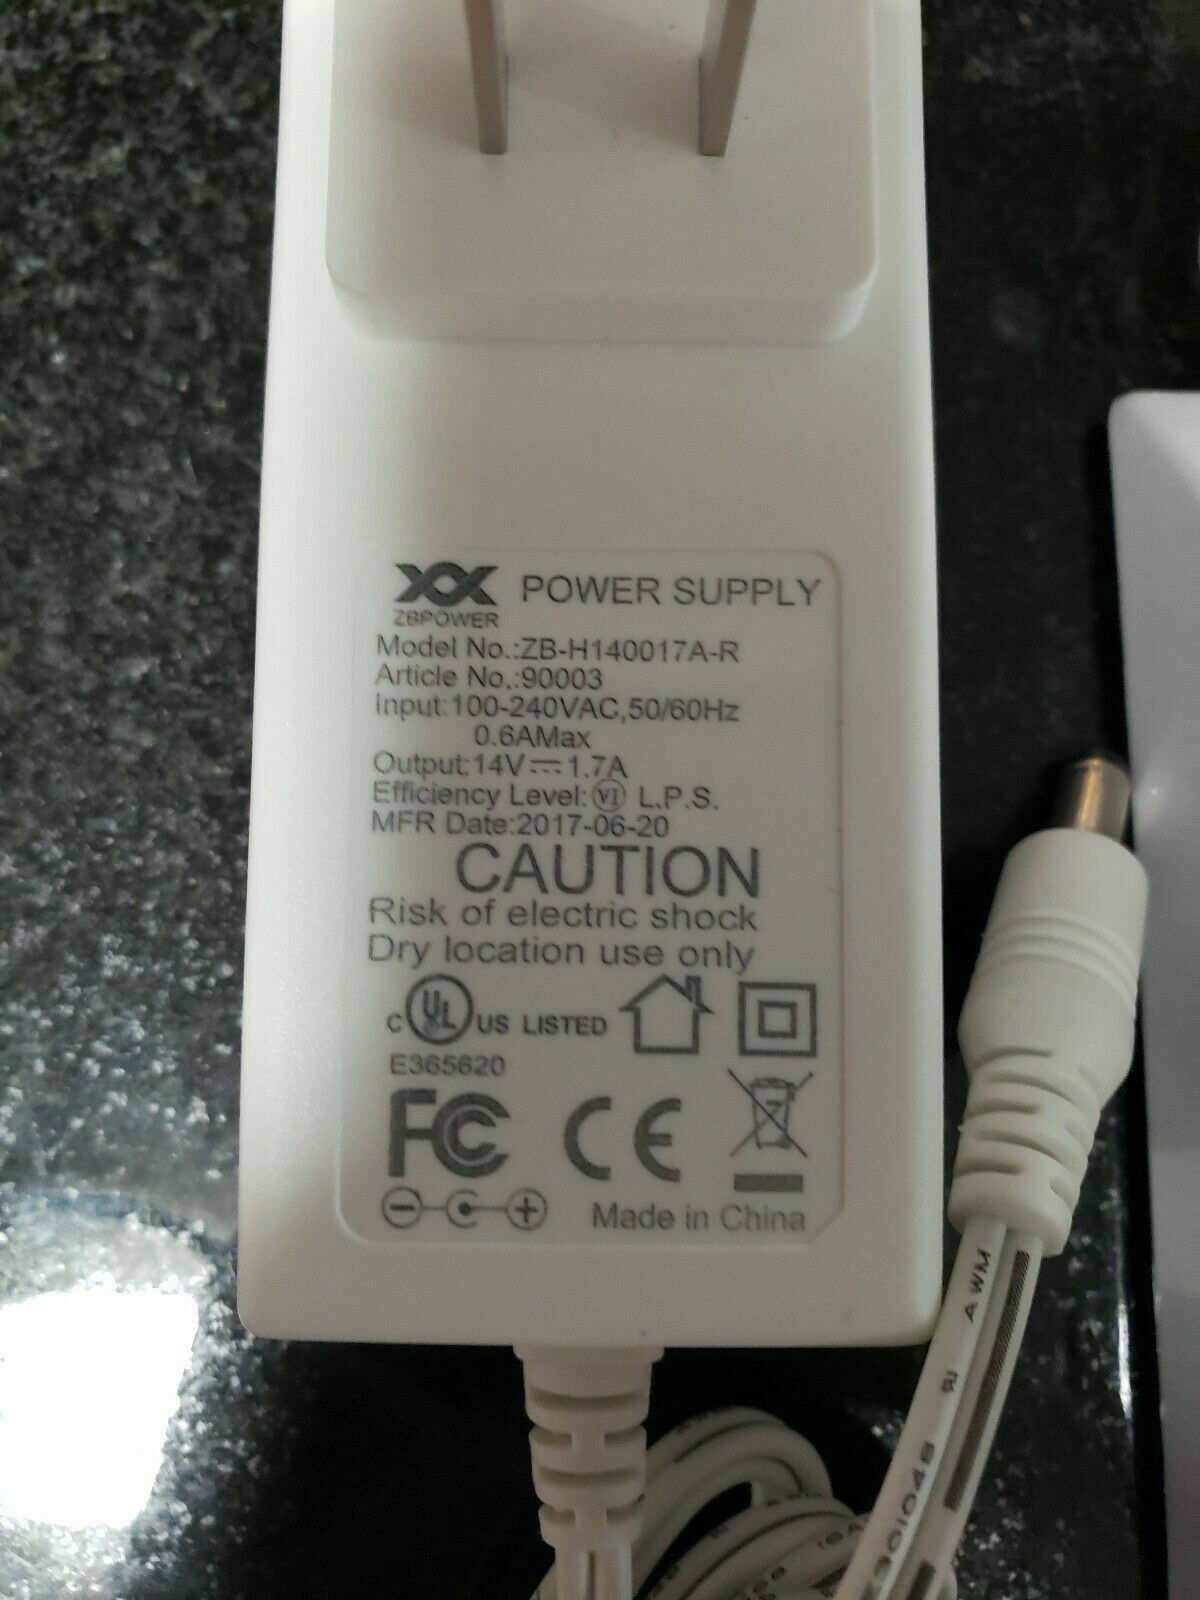 Power Supply zb-h140017a-r, ADT smartthings, Vivint, 2GIG-AC2-PLUG 5.5mm x 2.1m Model: 14V Power Supply General Cond